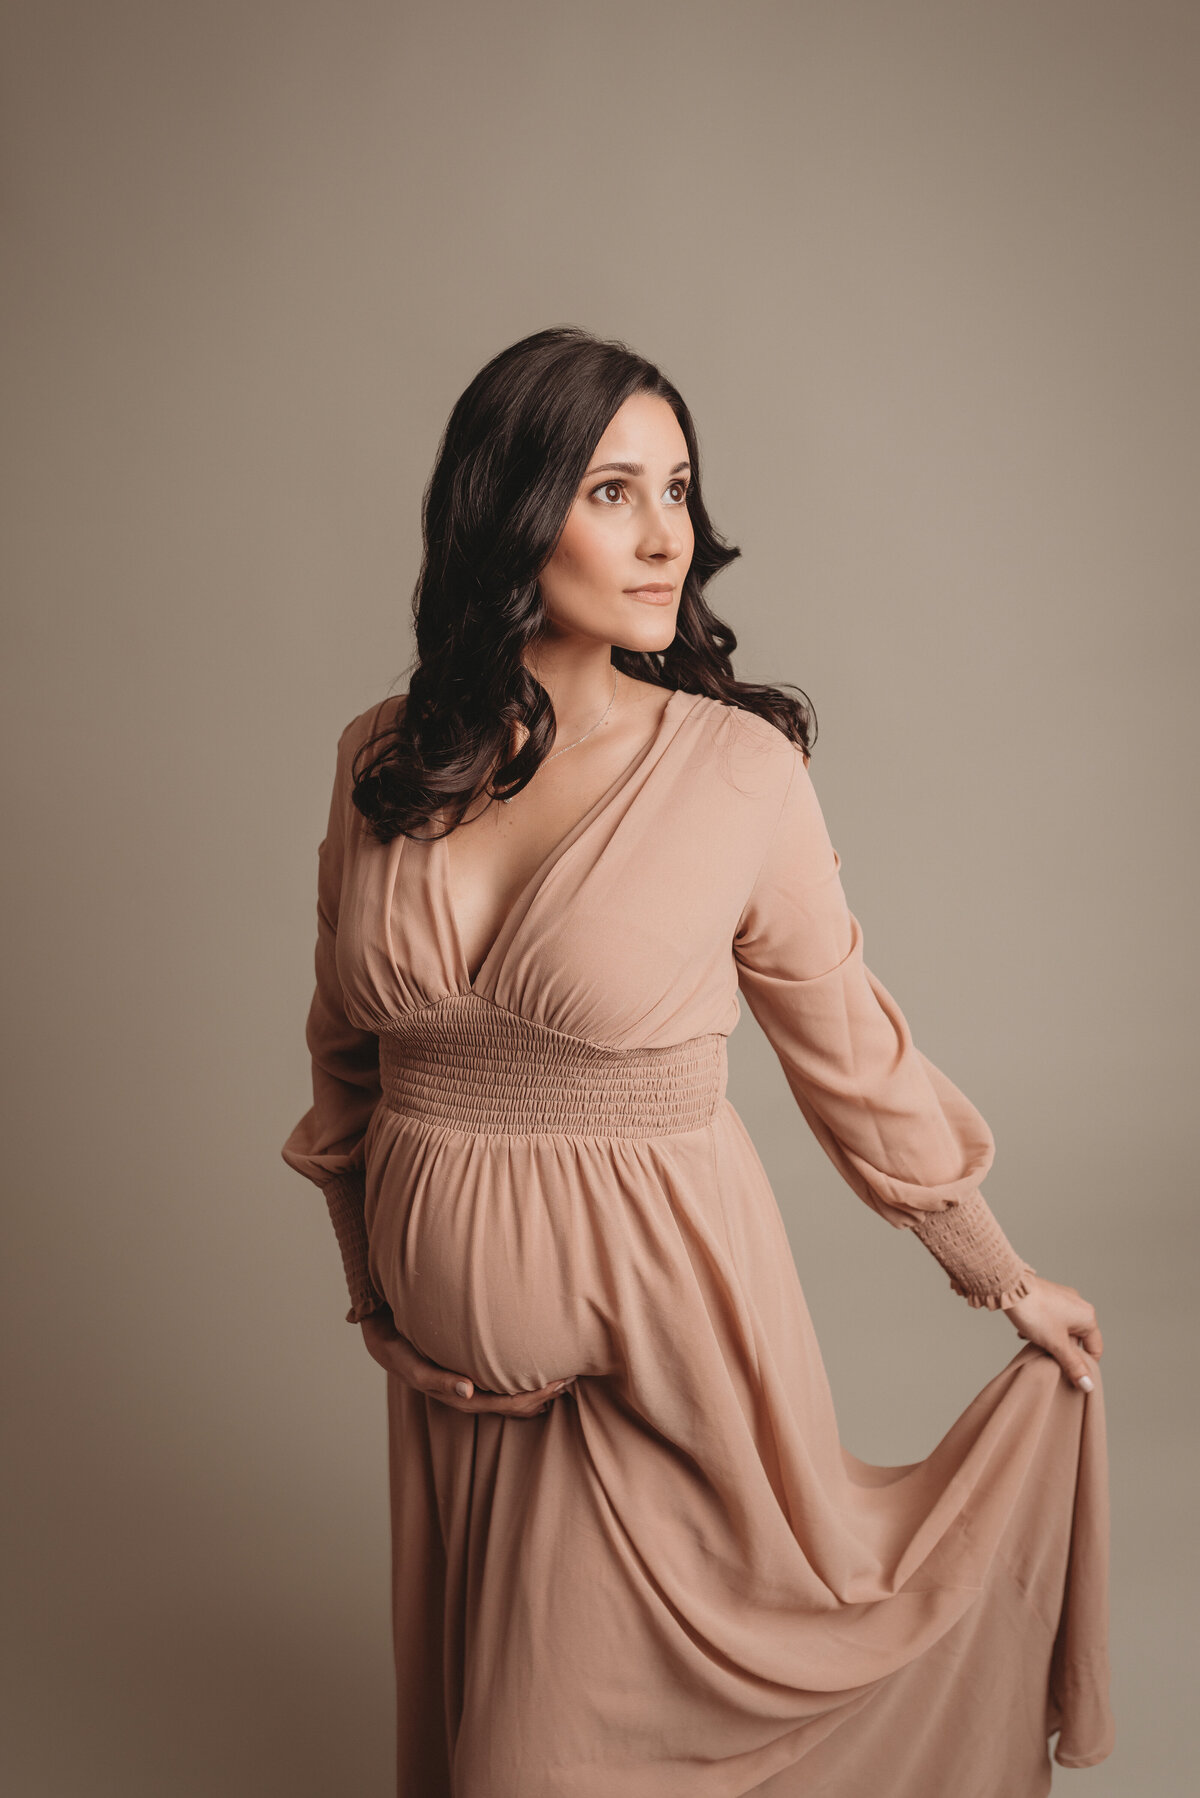 Pregnant woman wearing flowing light pink long sleeve V neck dress holding baby bump with one hand and dress with other hand looking up and to the side